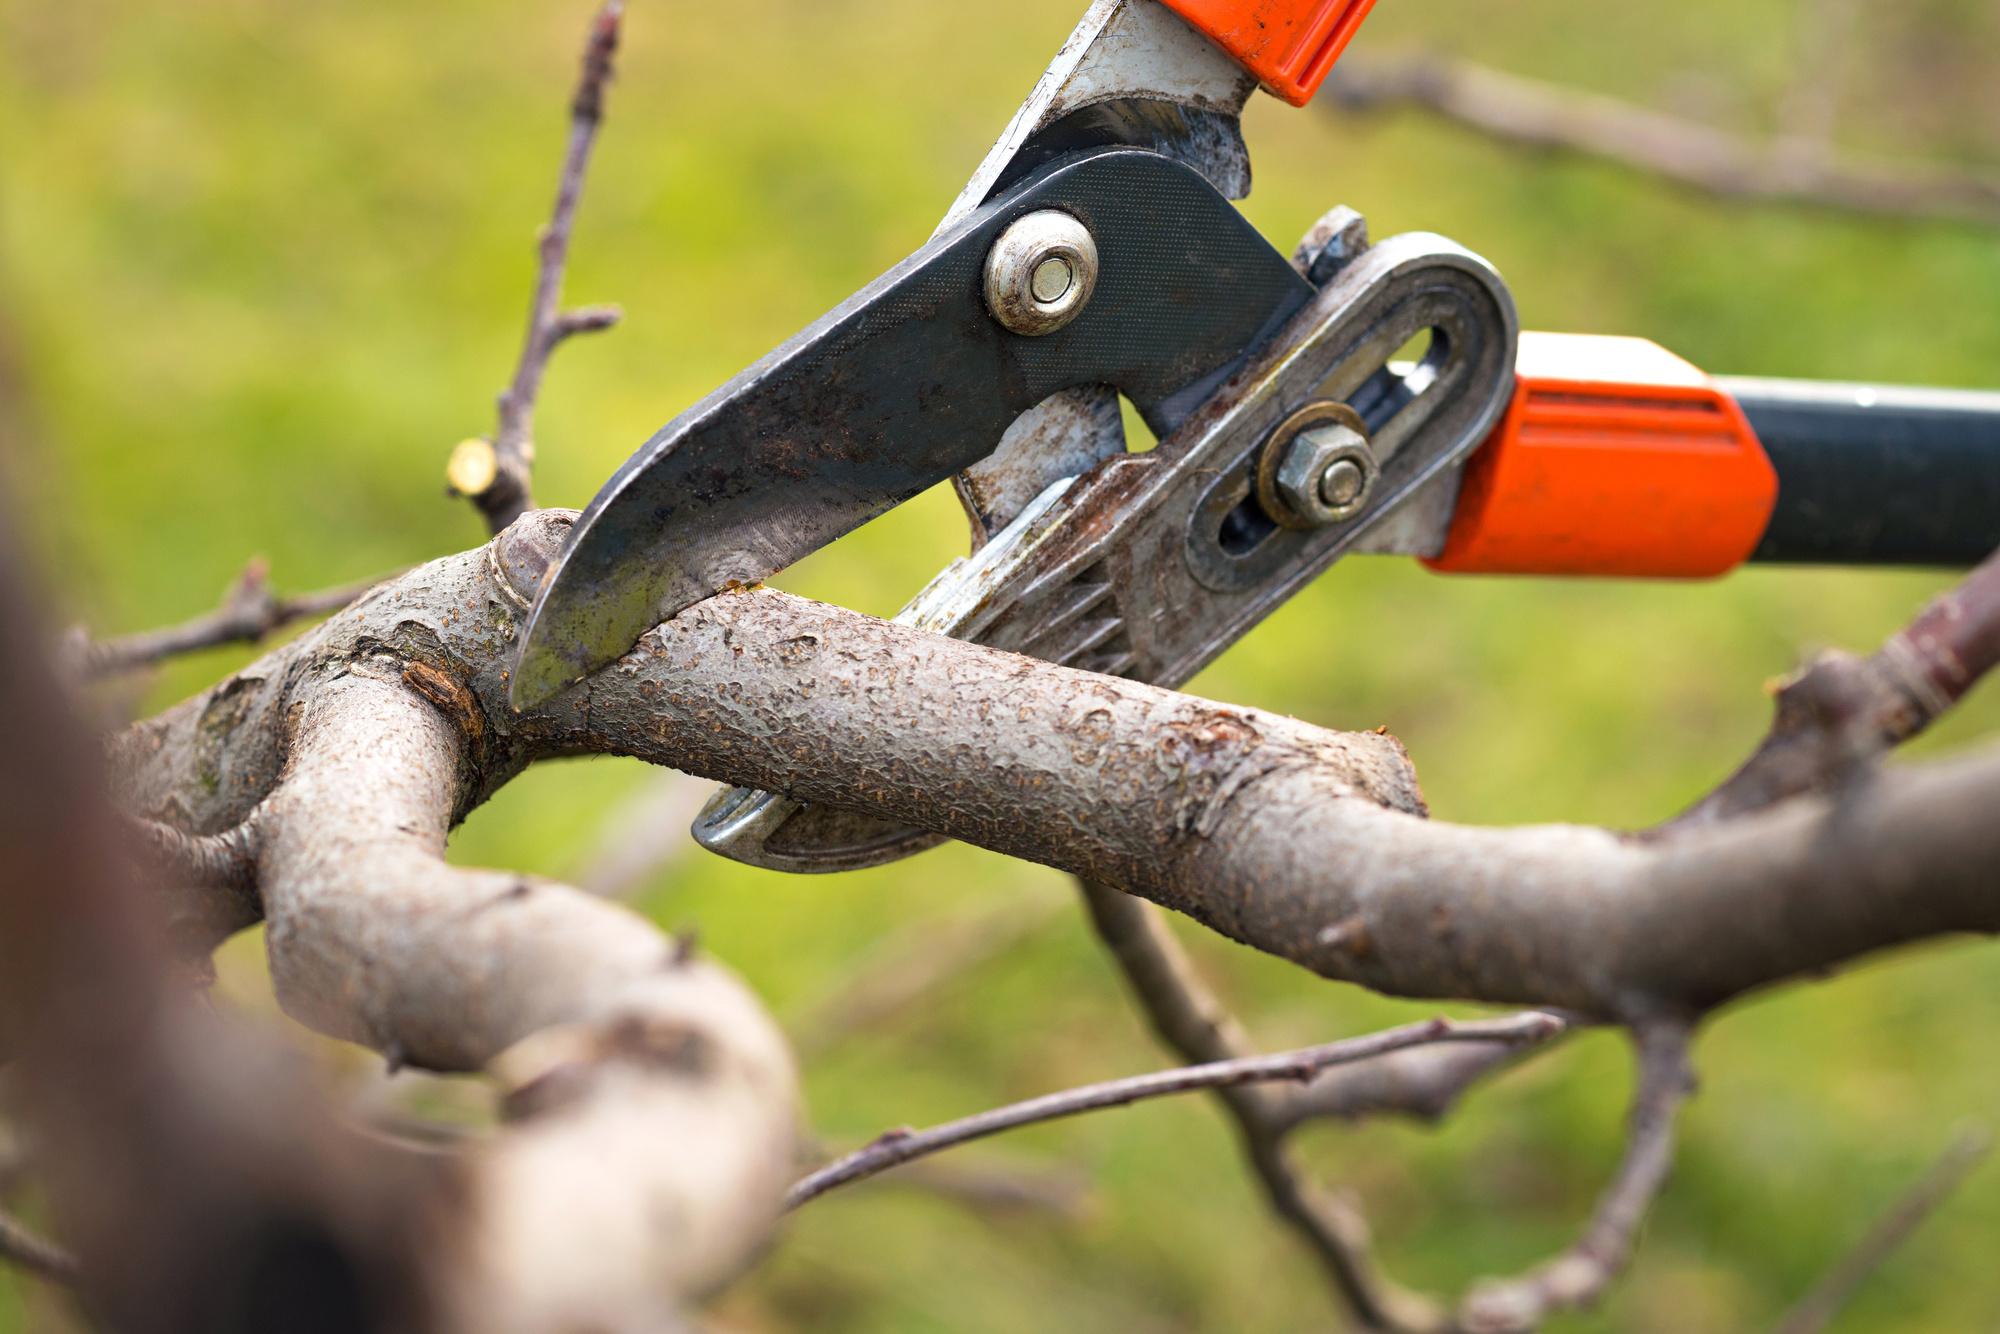 The Best Tips and Techniques for Trimming and Pruning Trees